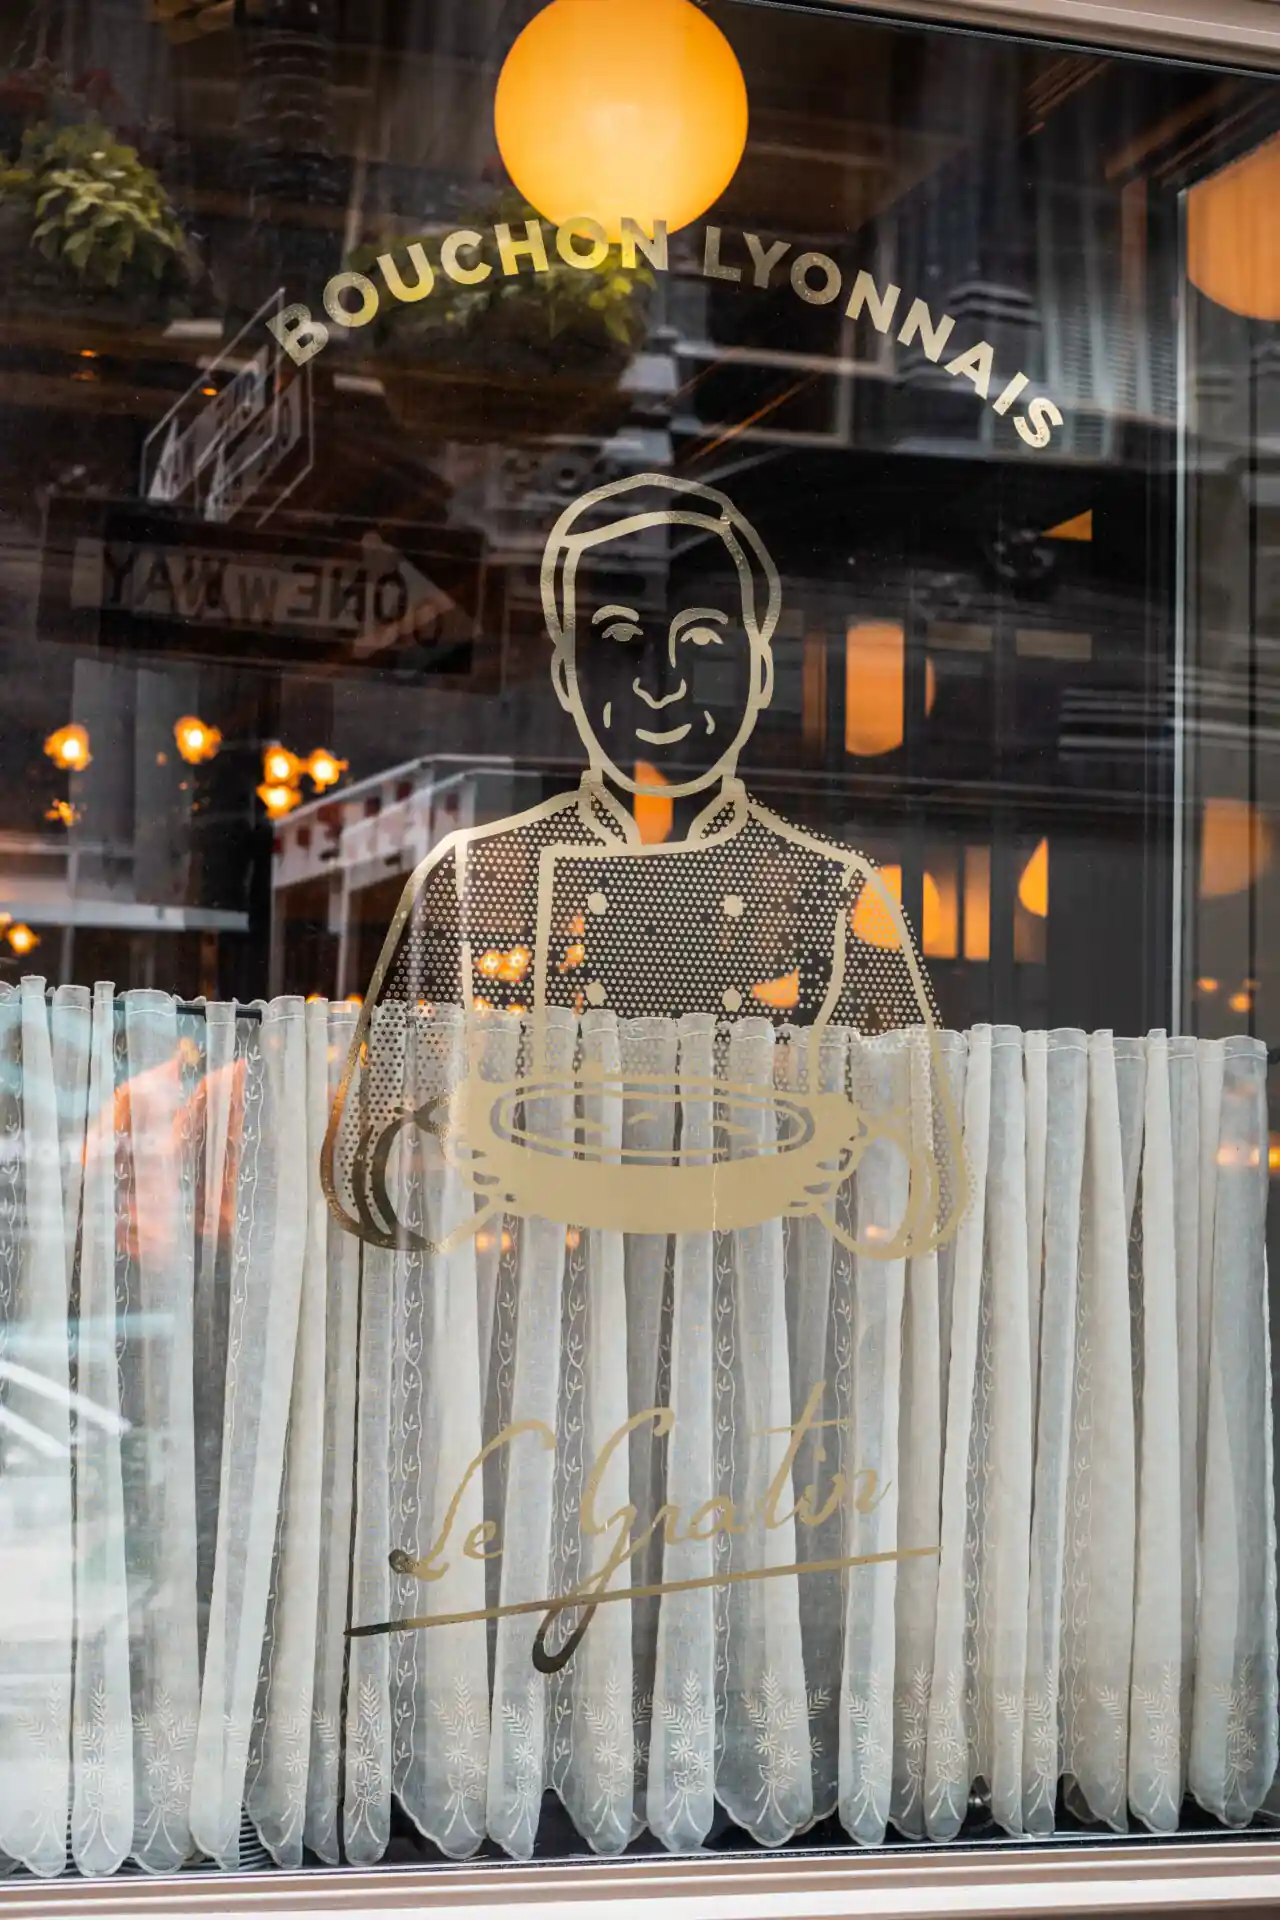 Le Gratin window showcases a chef holding plates in their logo display.